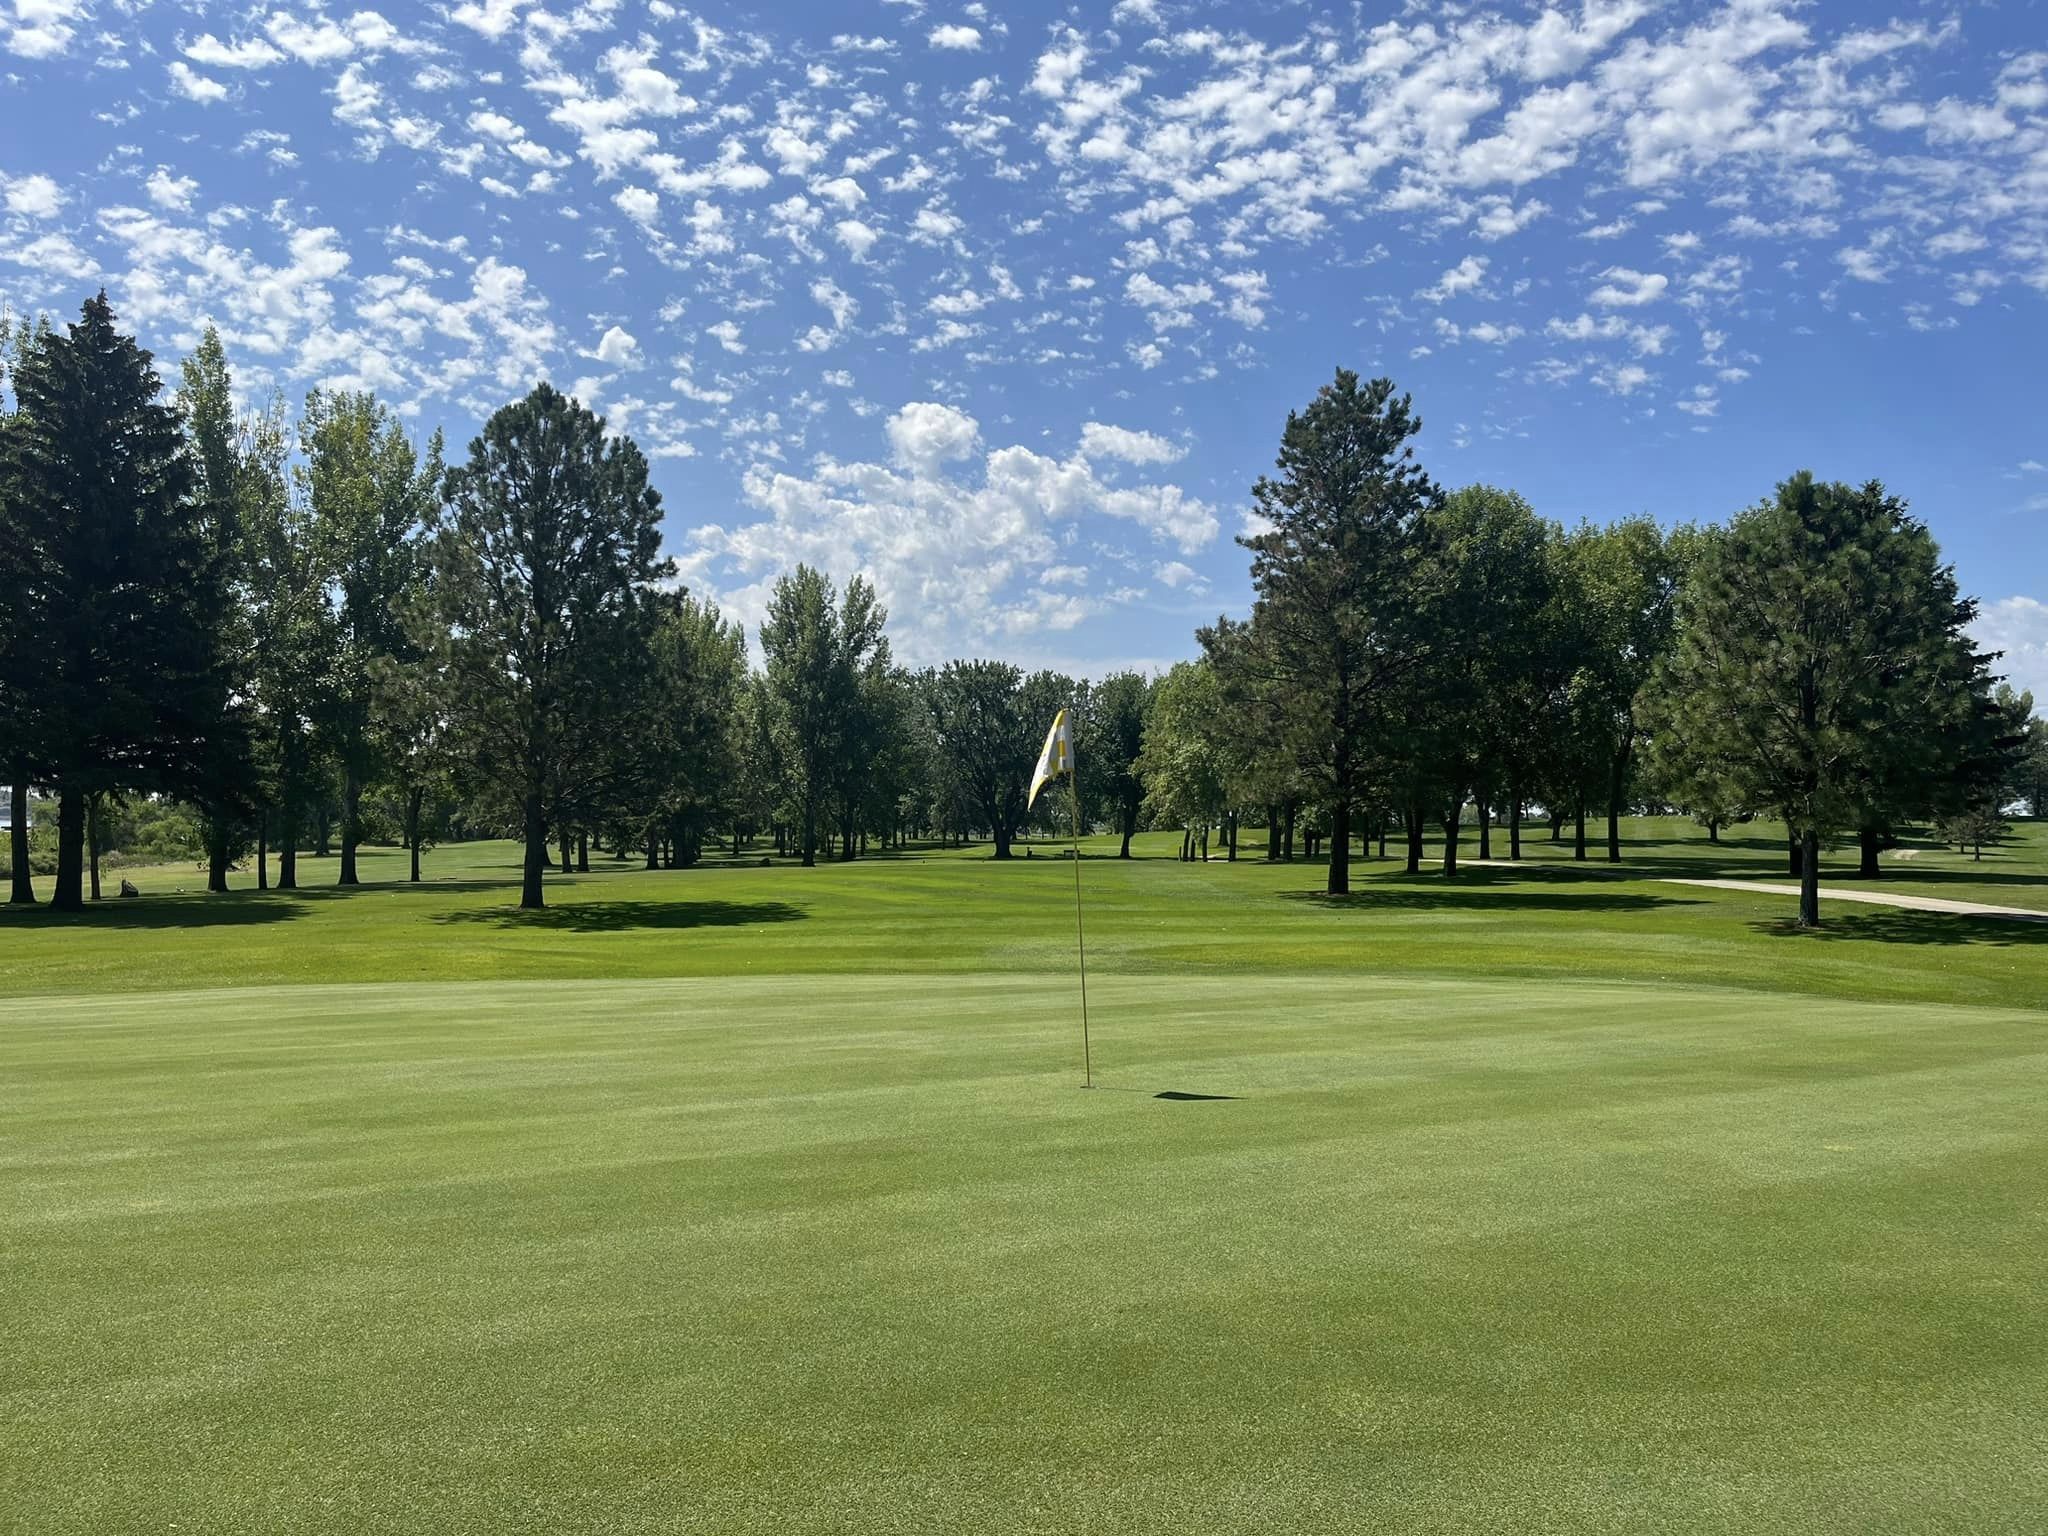 View of golf course green with clouds in the sky